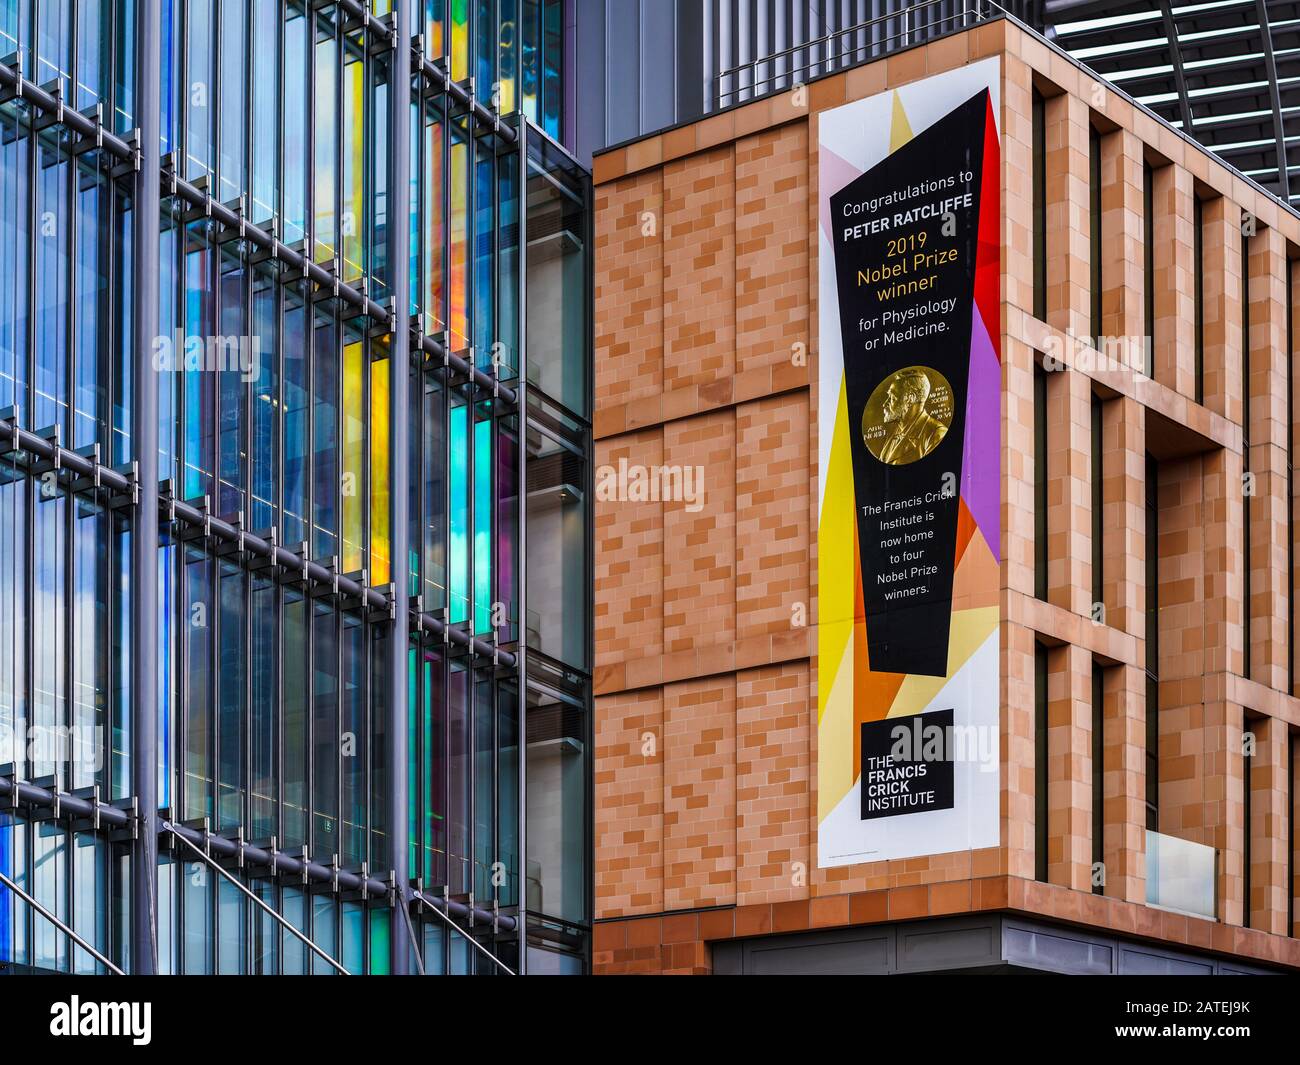 The Francis Crick Institute London with a banner congratulating Peter Ratcliffe for his 2019 Nobel Prize for Physiology or Medicine. Stock Photo